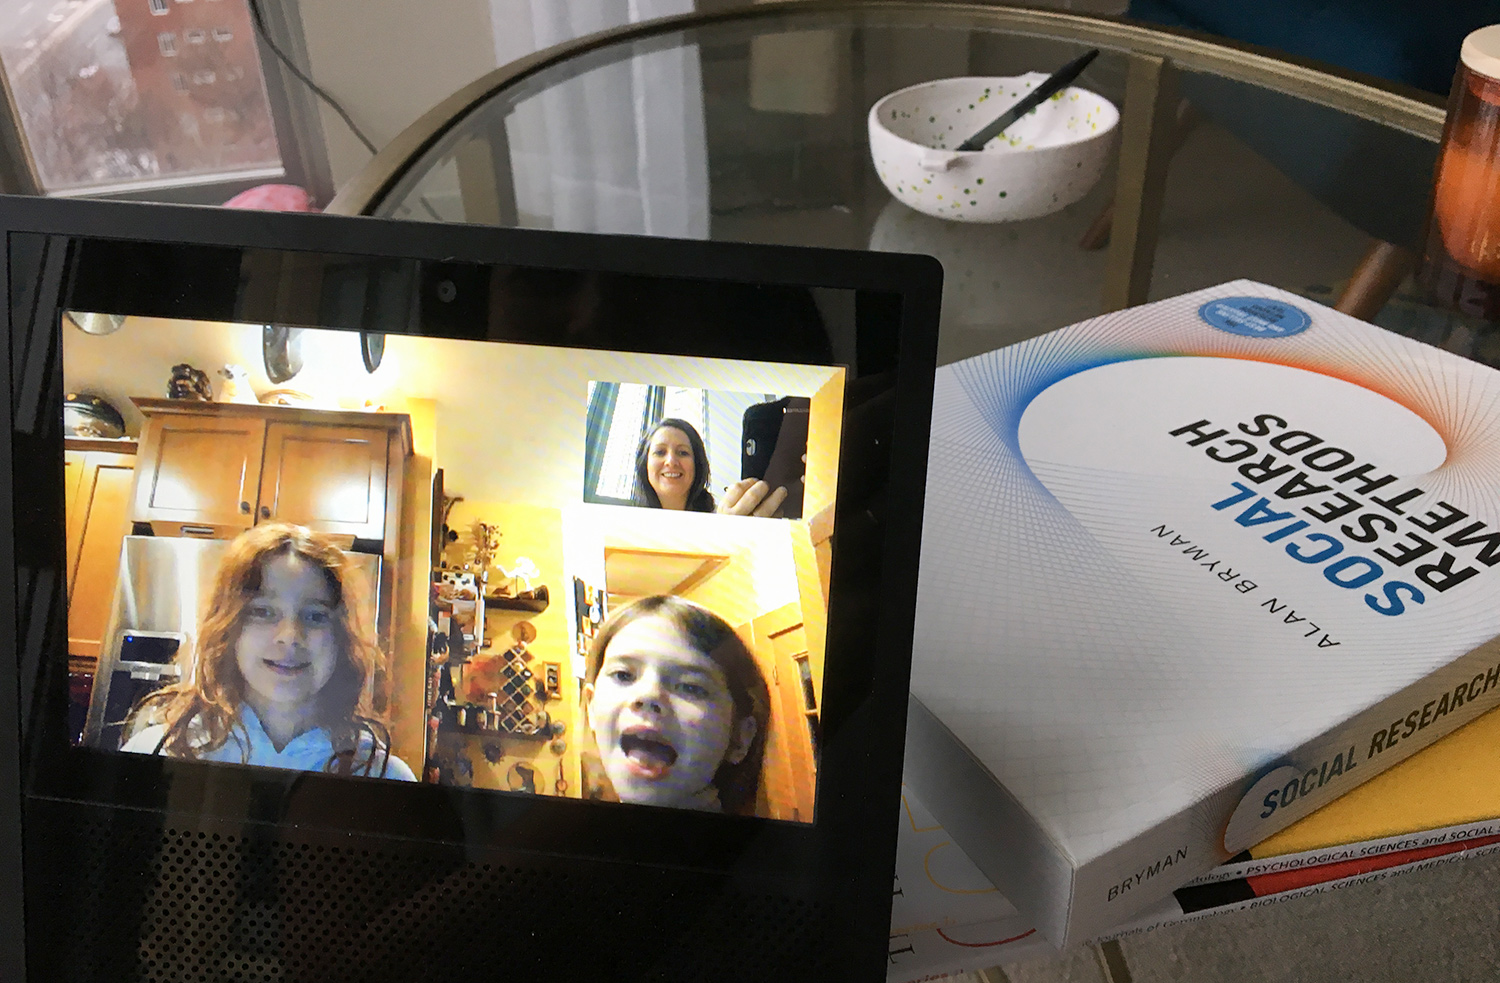 Susann Keohane and her two daughters using computer video chat to stay connected while she travels for work.